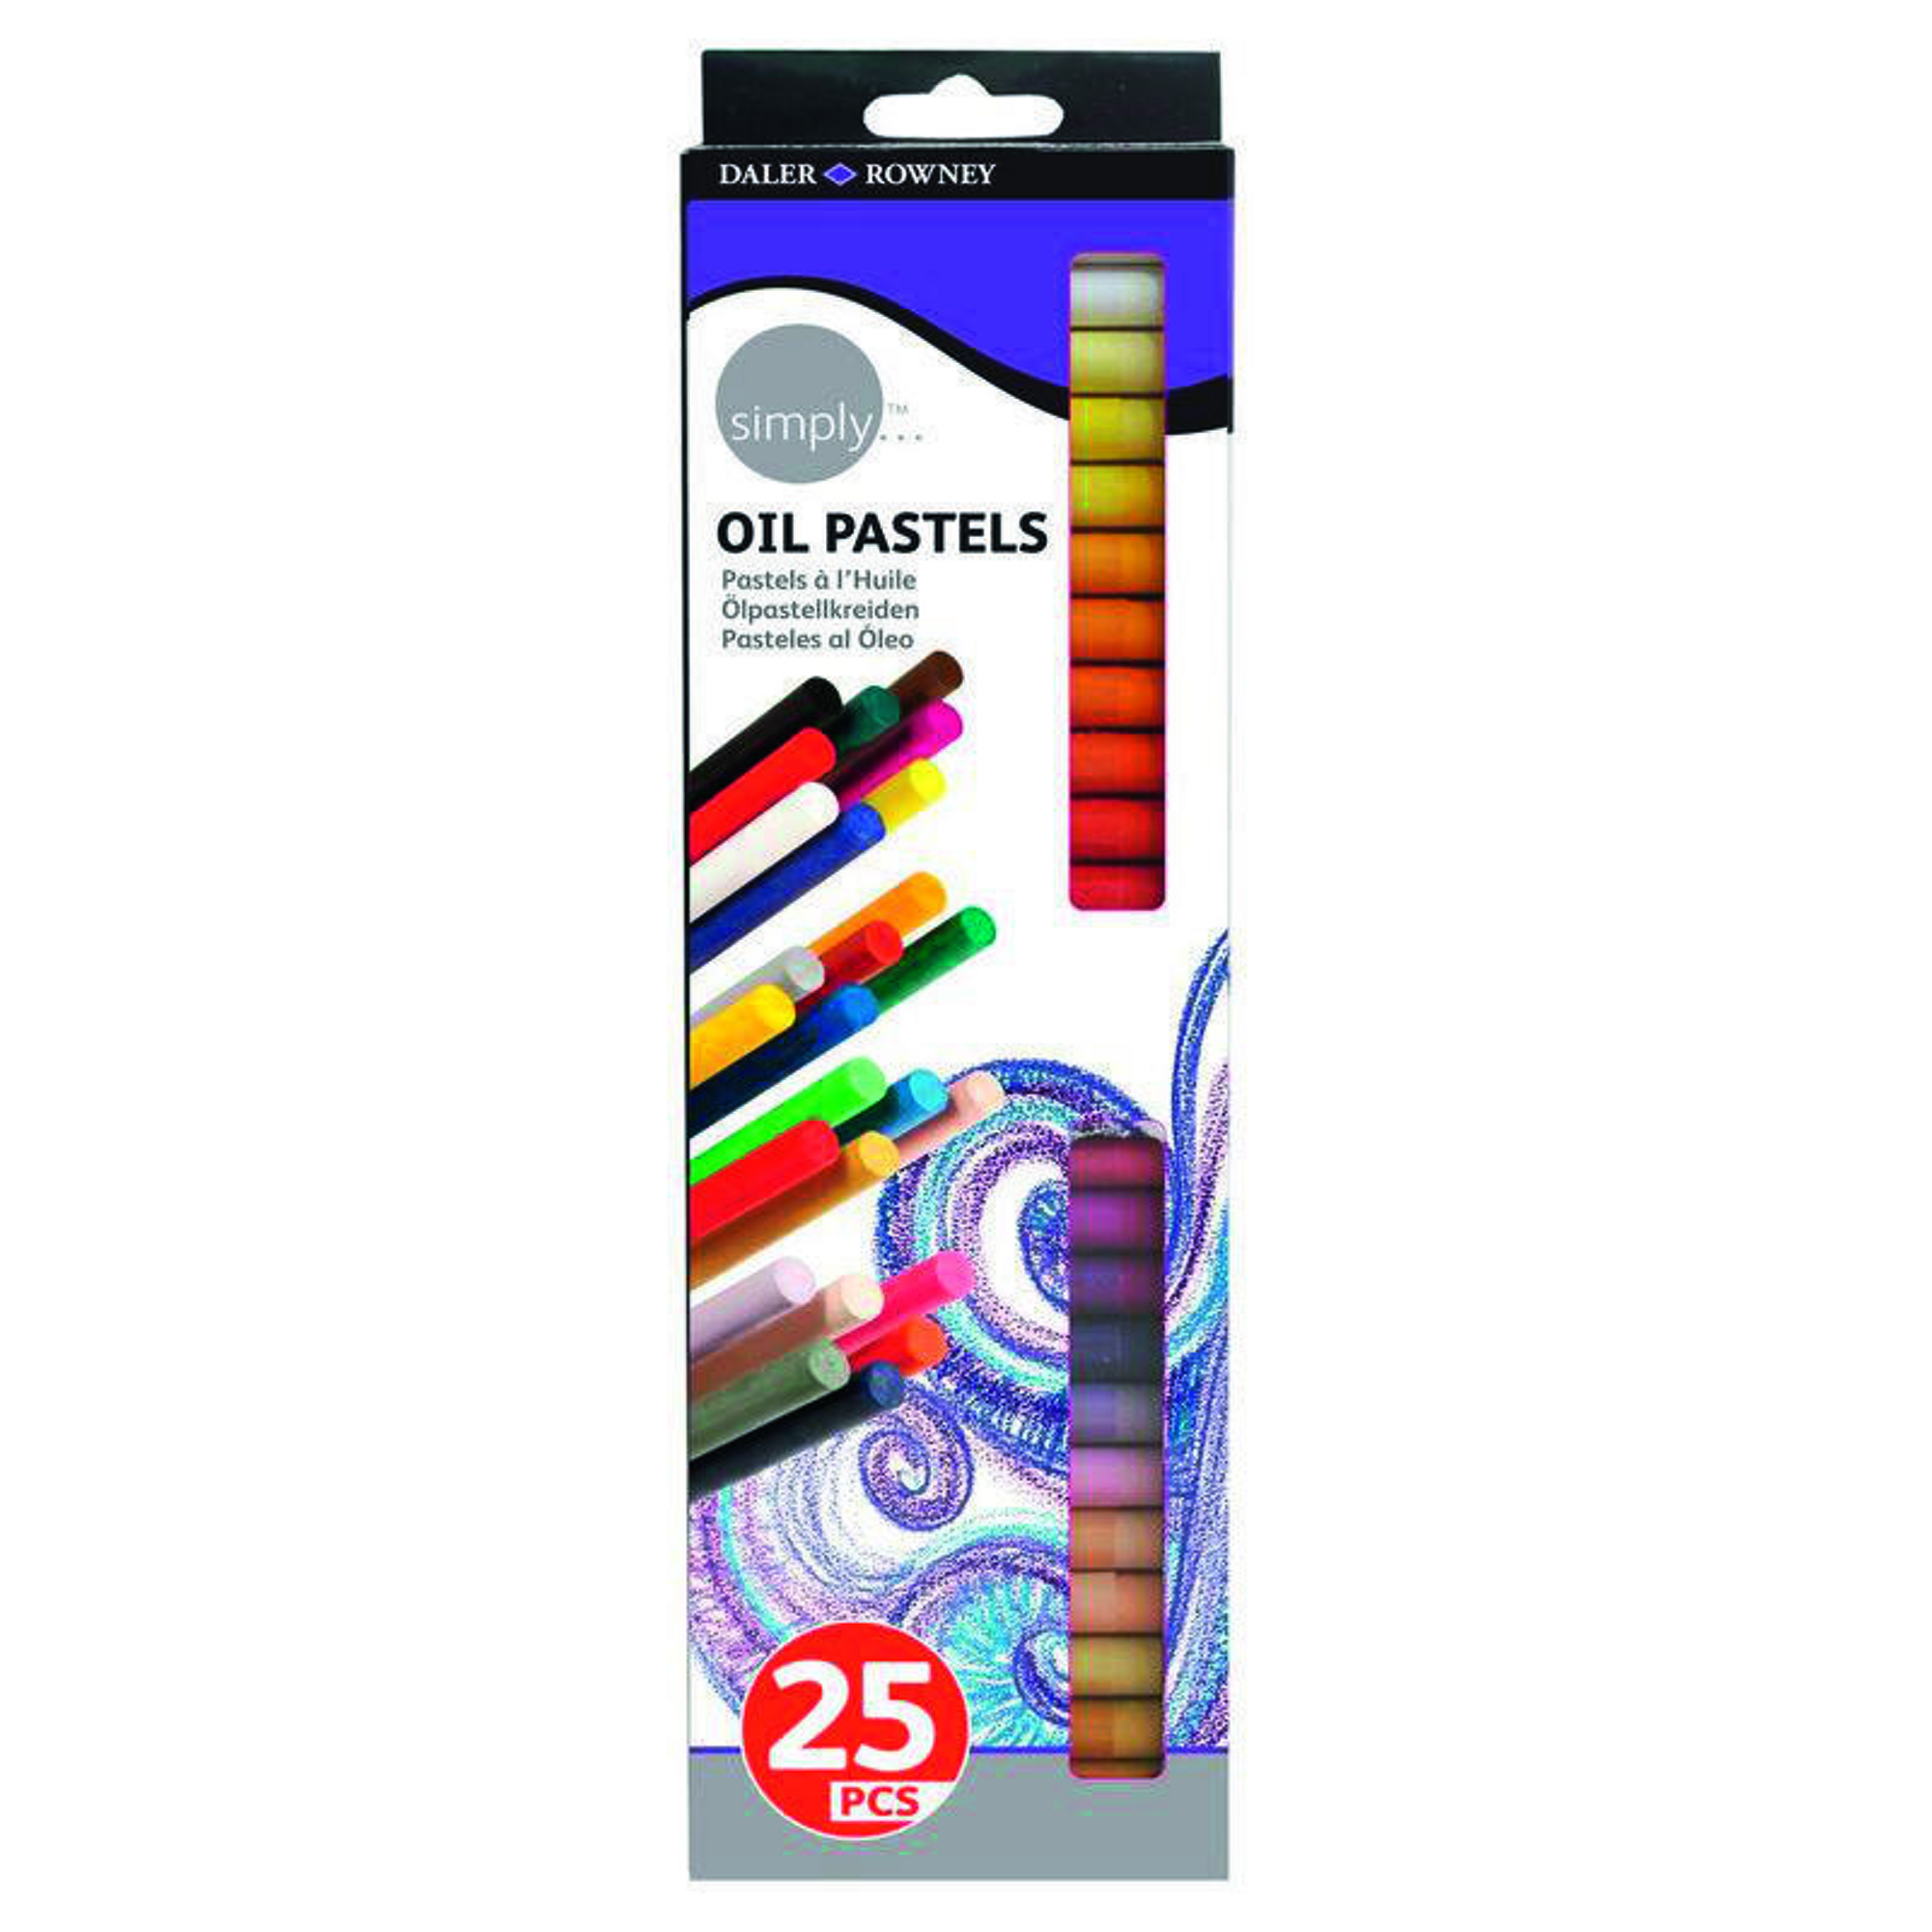 Simply 25 Oil Pastels